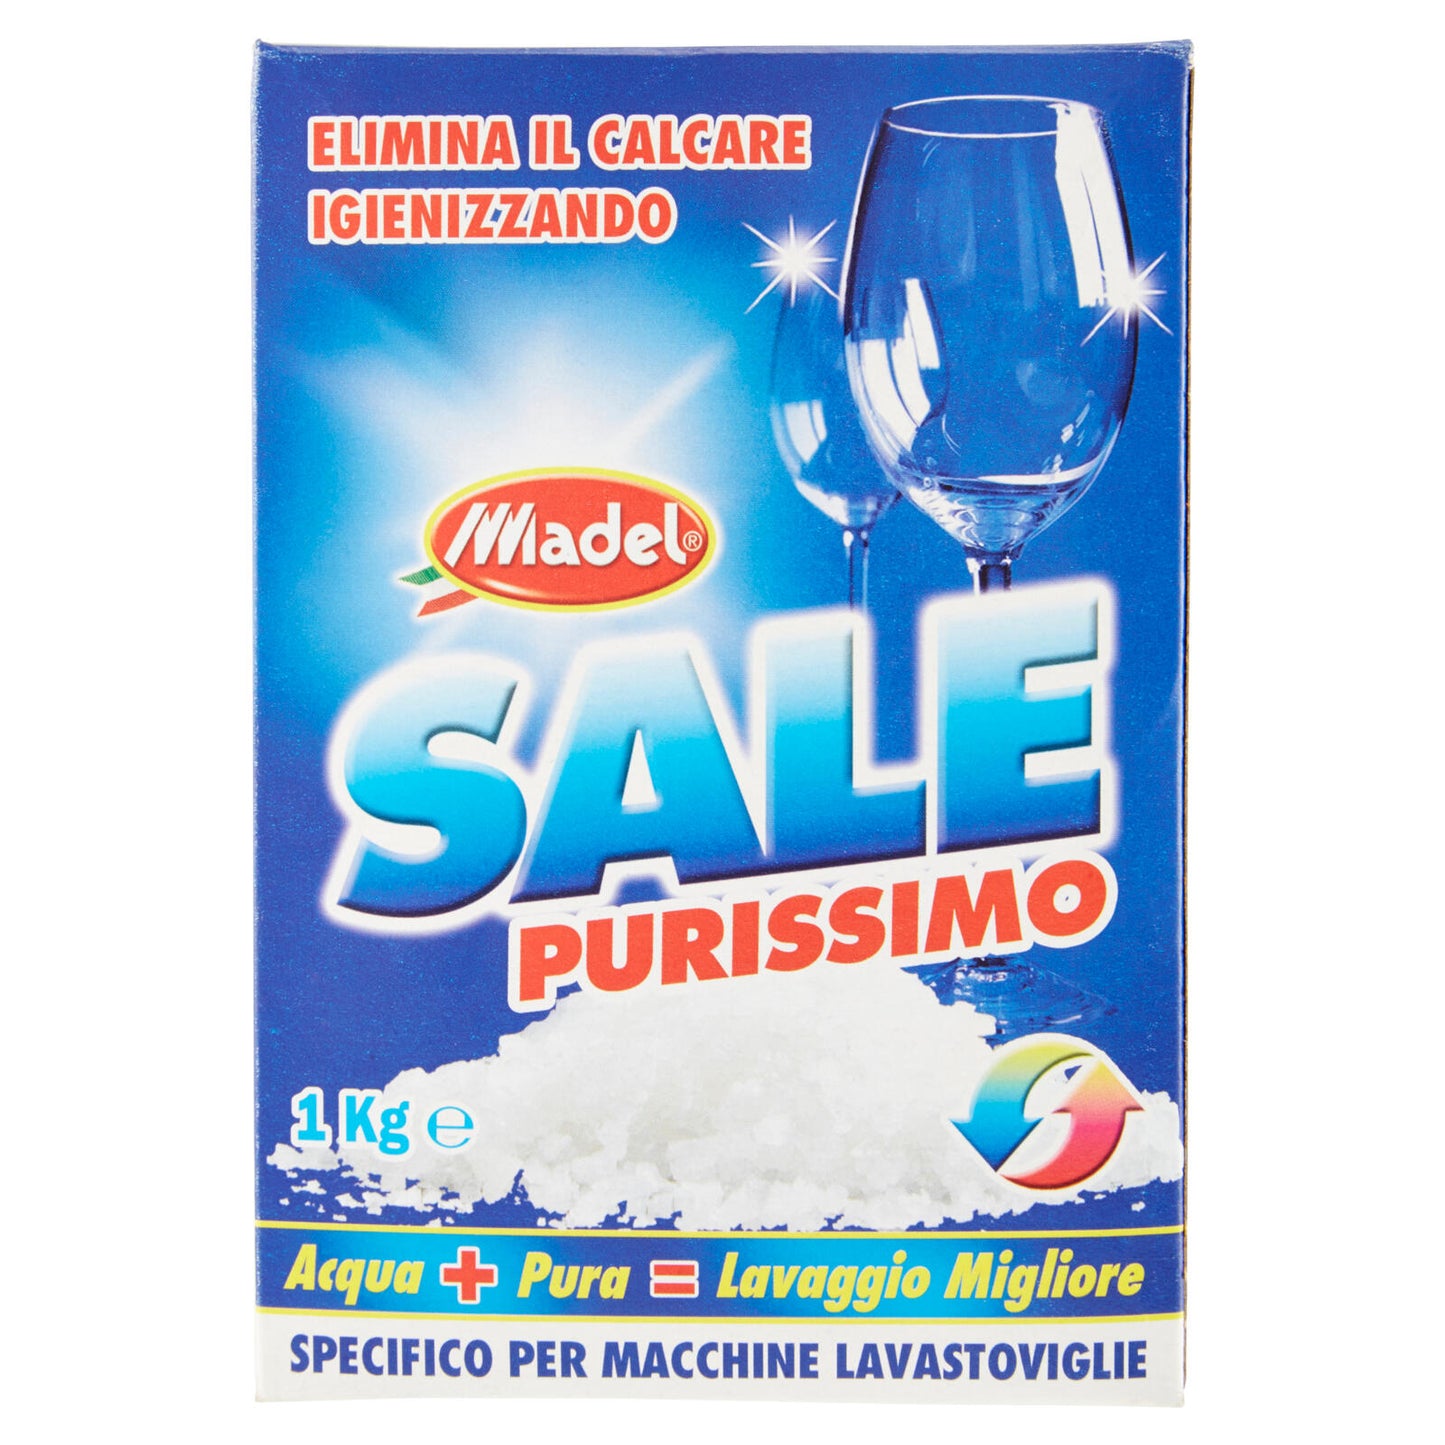 Madel Sale purissimo 1 kg